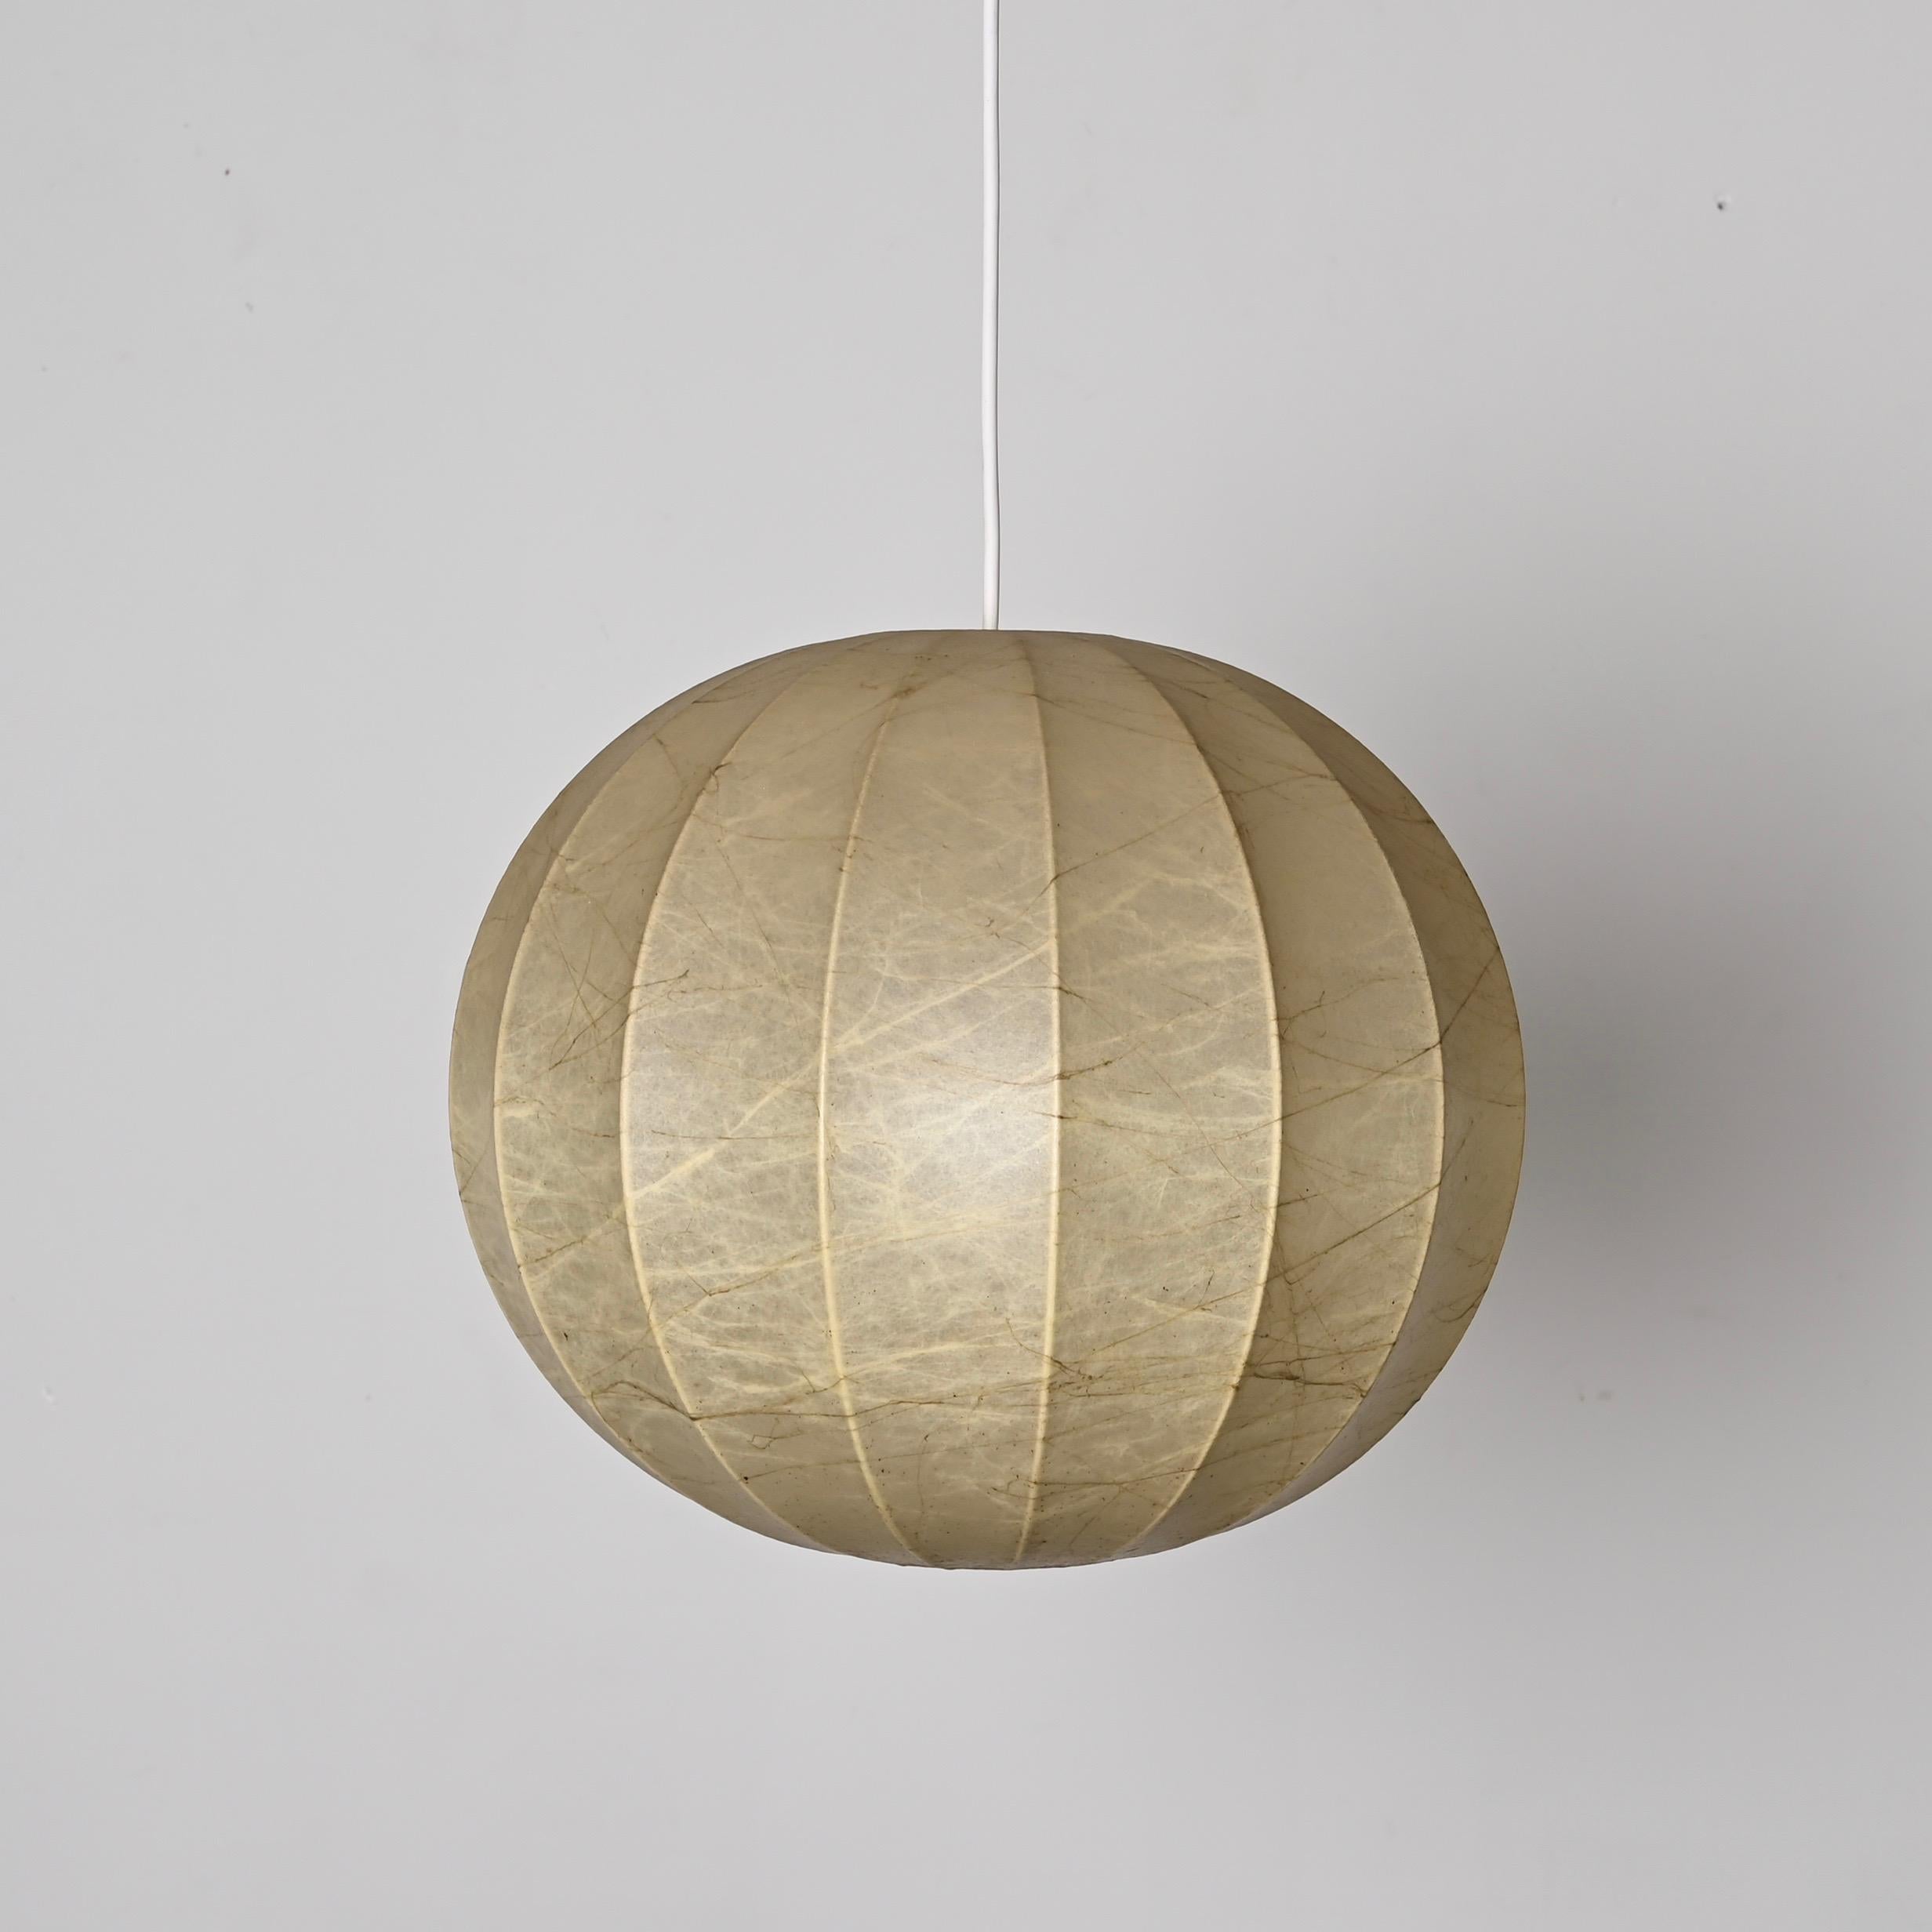 Stunning 'Cocoon' pendant in resin and steel. This lovely pendant lamp was designed by Achille Castiglioni in Italy in the 1960s.

This iconic piece features a round shade made in a natural soft resin which covers a metal frame with a regular and